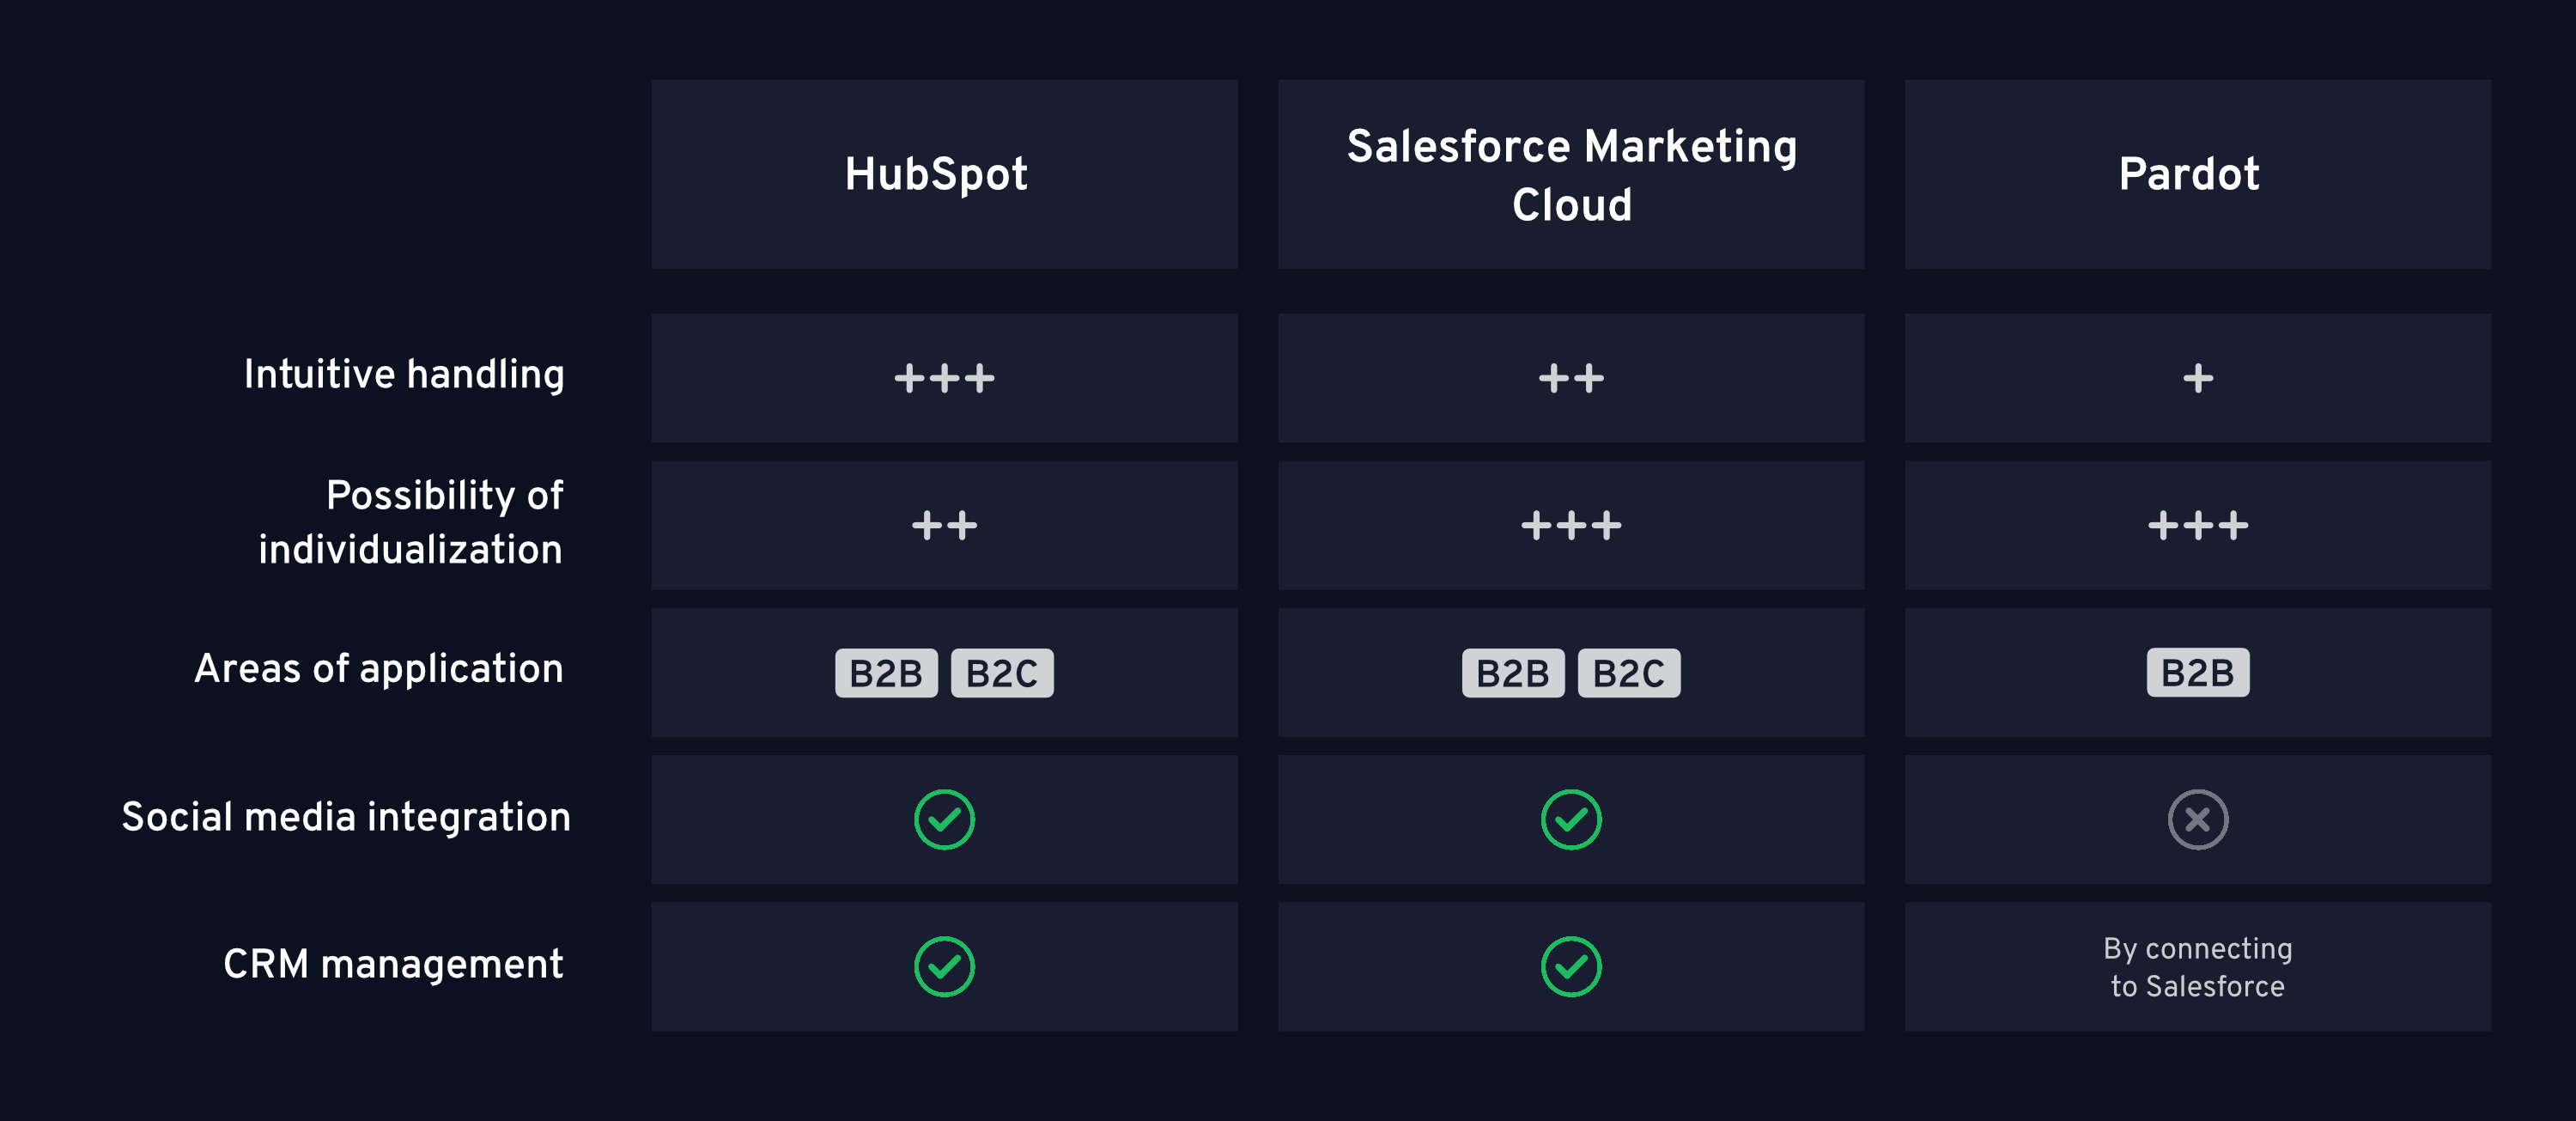 The various marketing automation tools differ in their functionality and usability. Here is an overview of HubSpot, the Salesforce Marketing Cloud and Pardot.